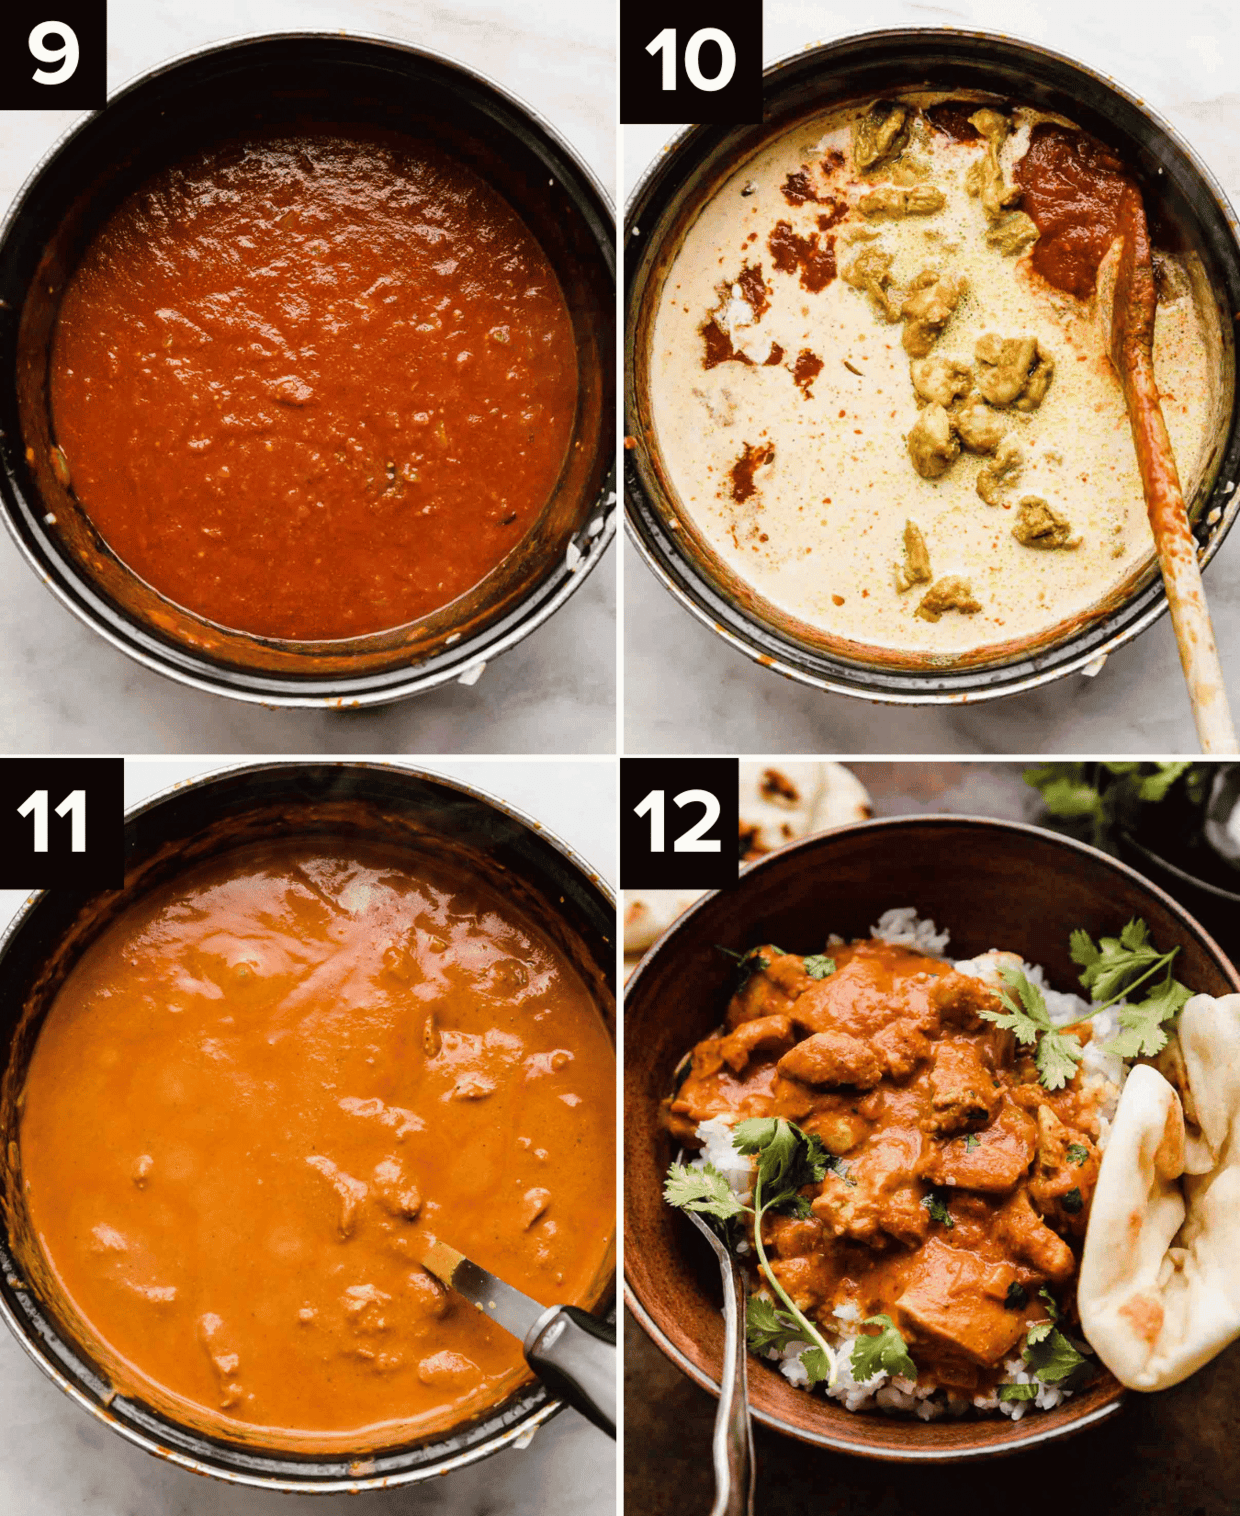 Four images, top left is a red sauce in a black pot, top right is cream and chicken tikka masala chicken thigh pieces in pot, bottom left is a deep orange colored Chicken Tikka Masala in a pot, bottom right is Chicken Tikka Masala topped with cilantro in a brown bowl.